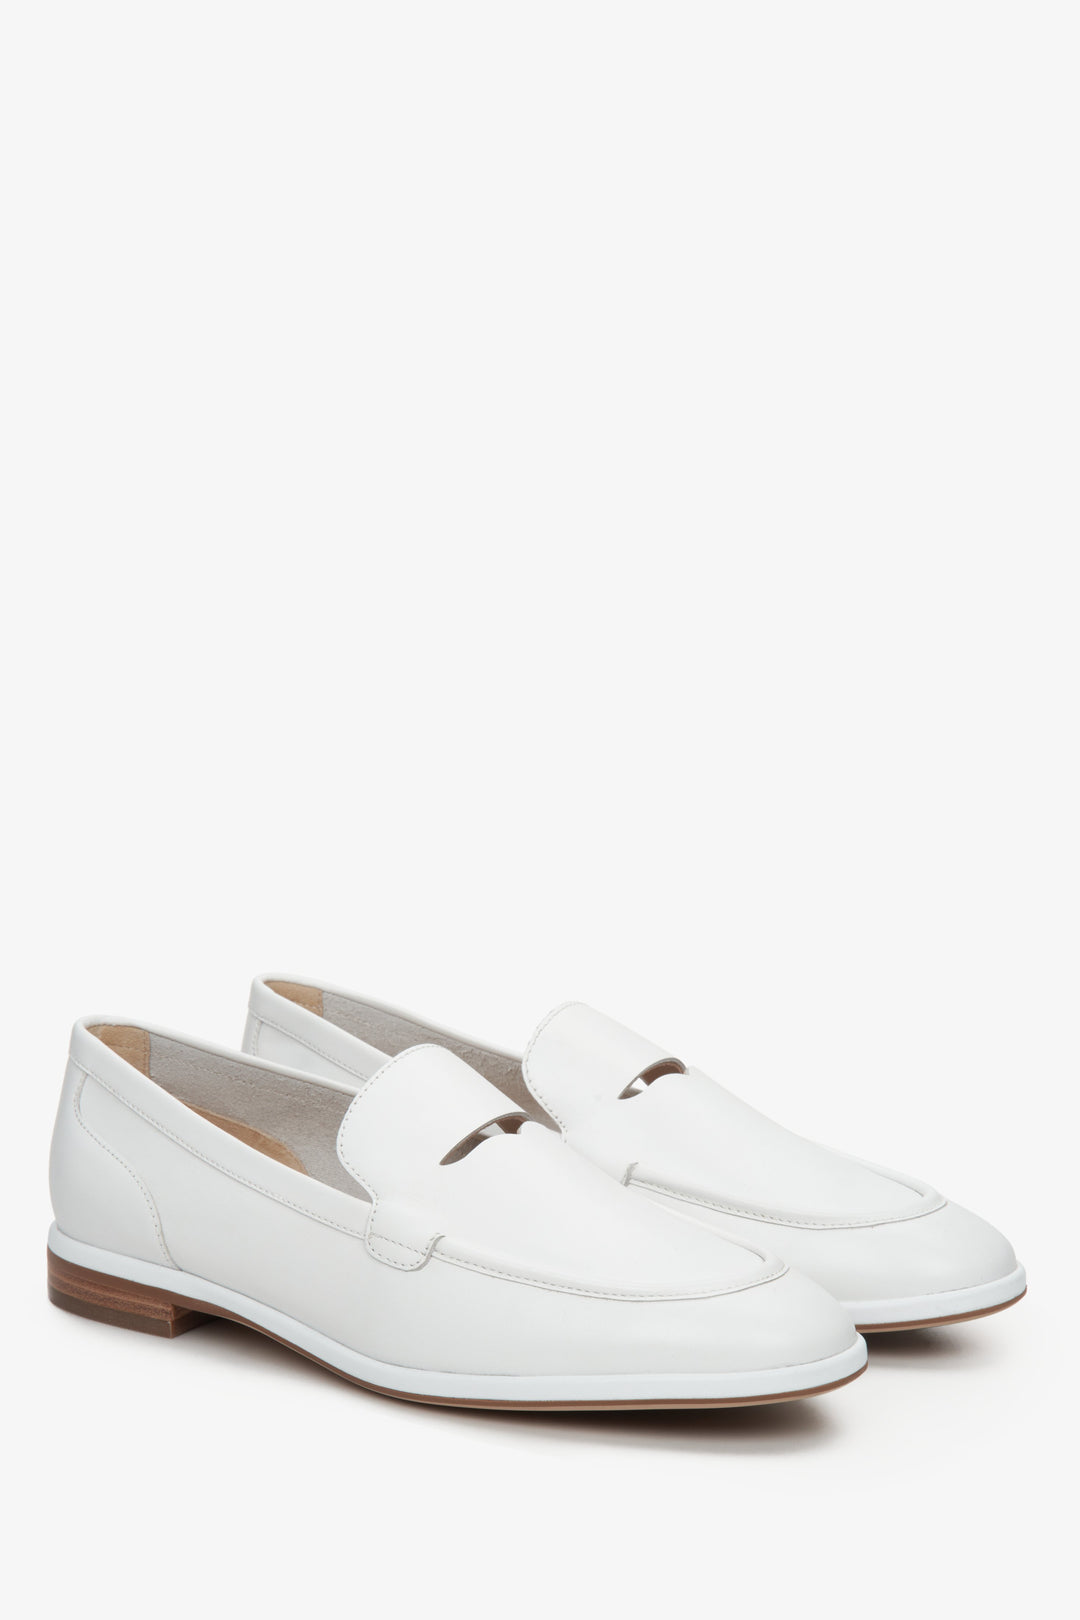 Women's Estro white moccasins for fall made of genuine leather - presentation of the toe and side vamp.